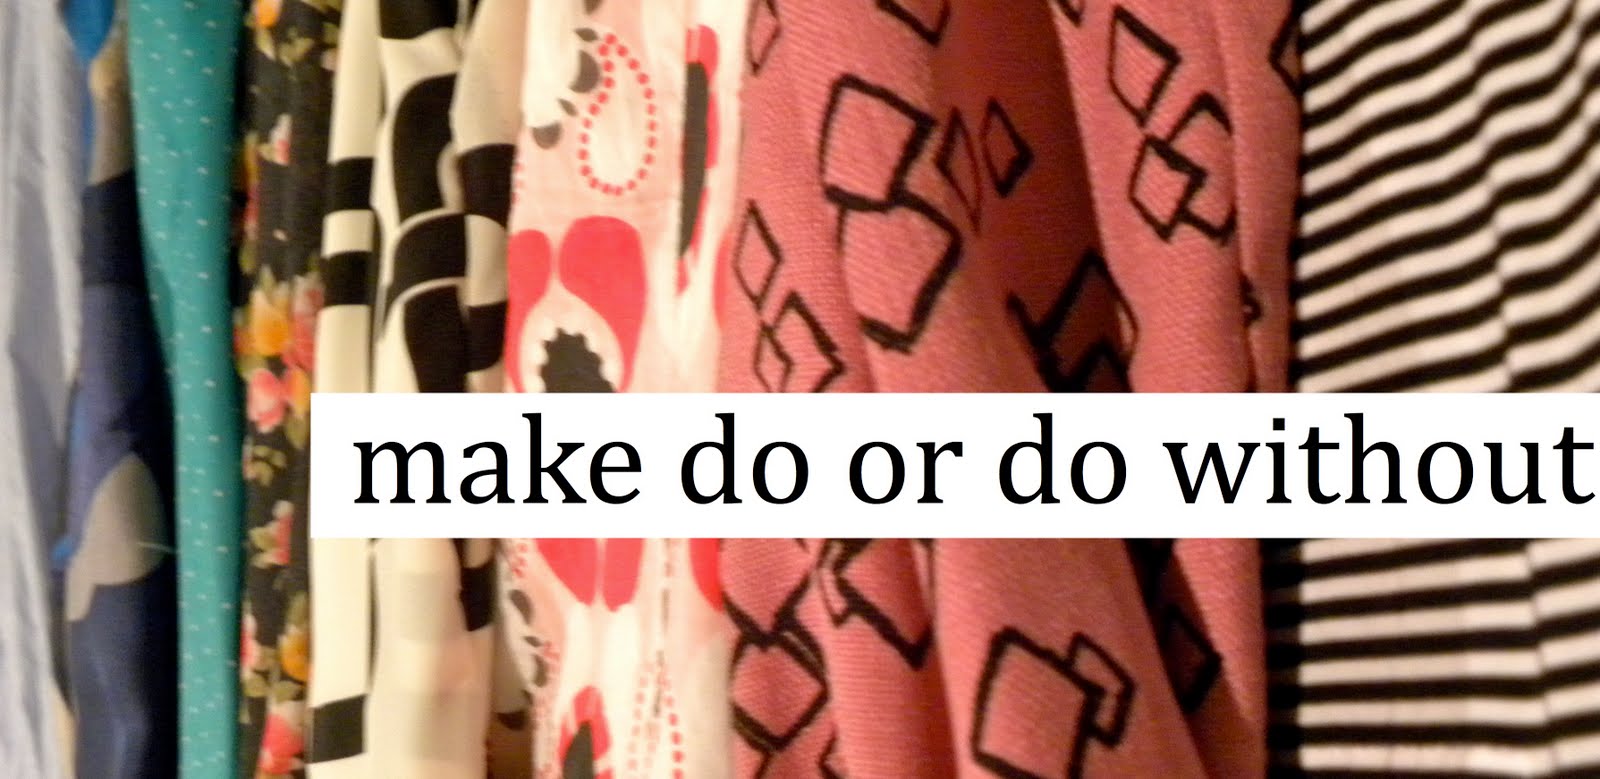 make do or do without